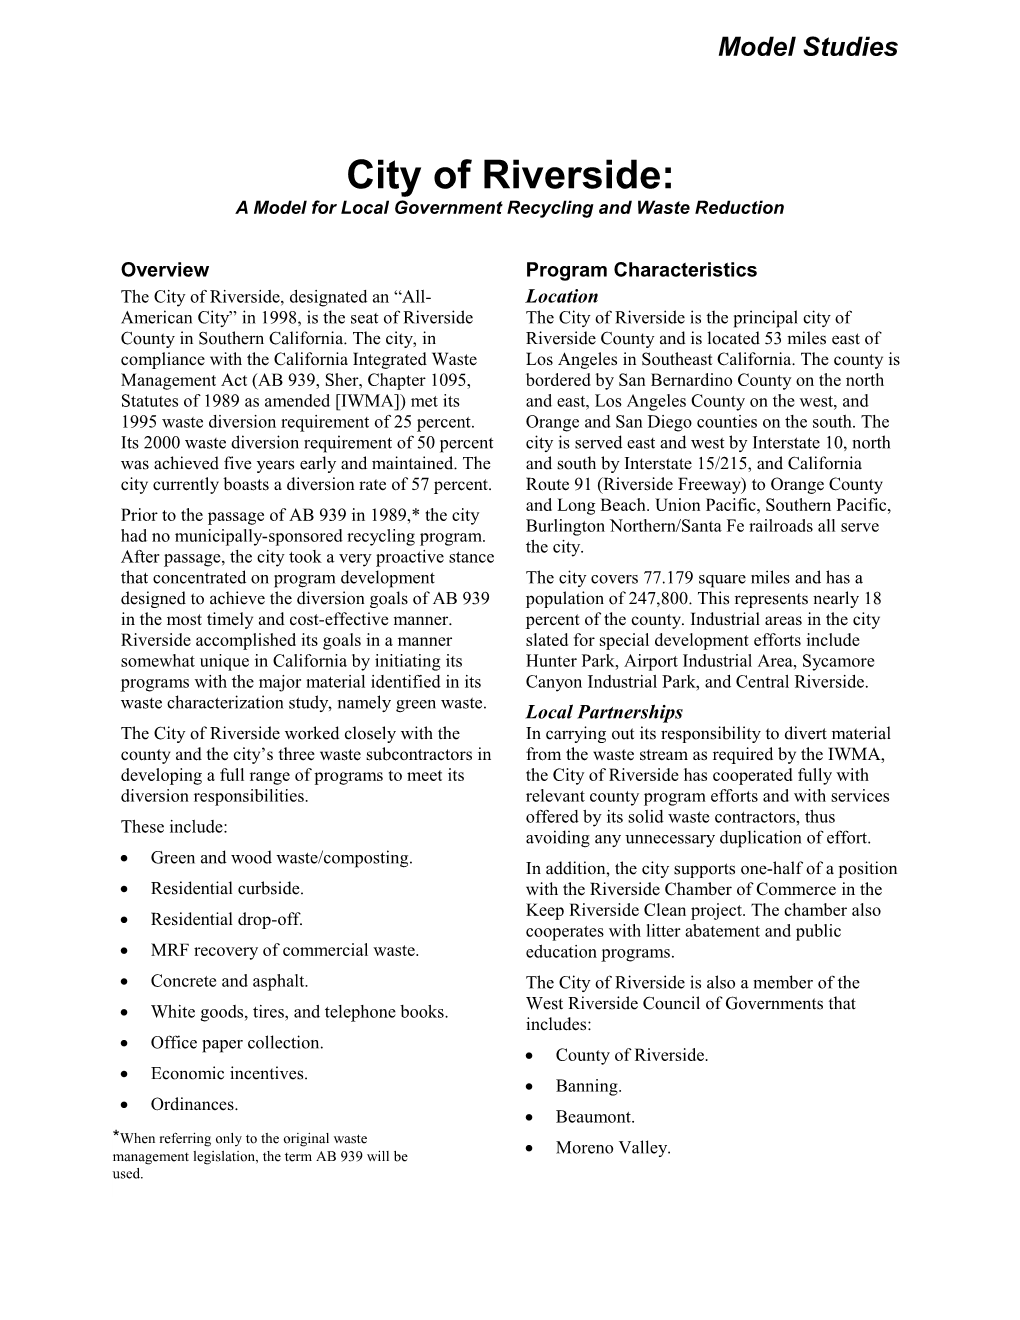 City of Riverside: a Model for Local Government Recycling and Waste Reduction